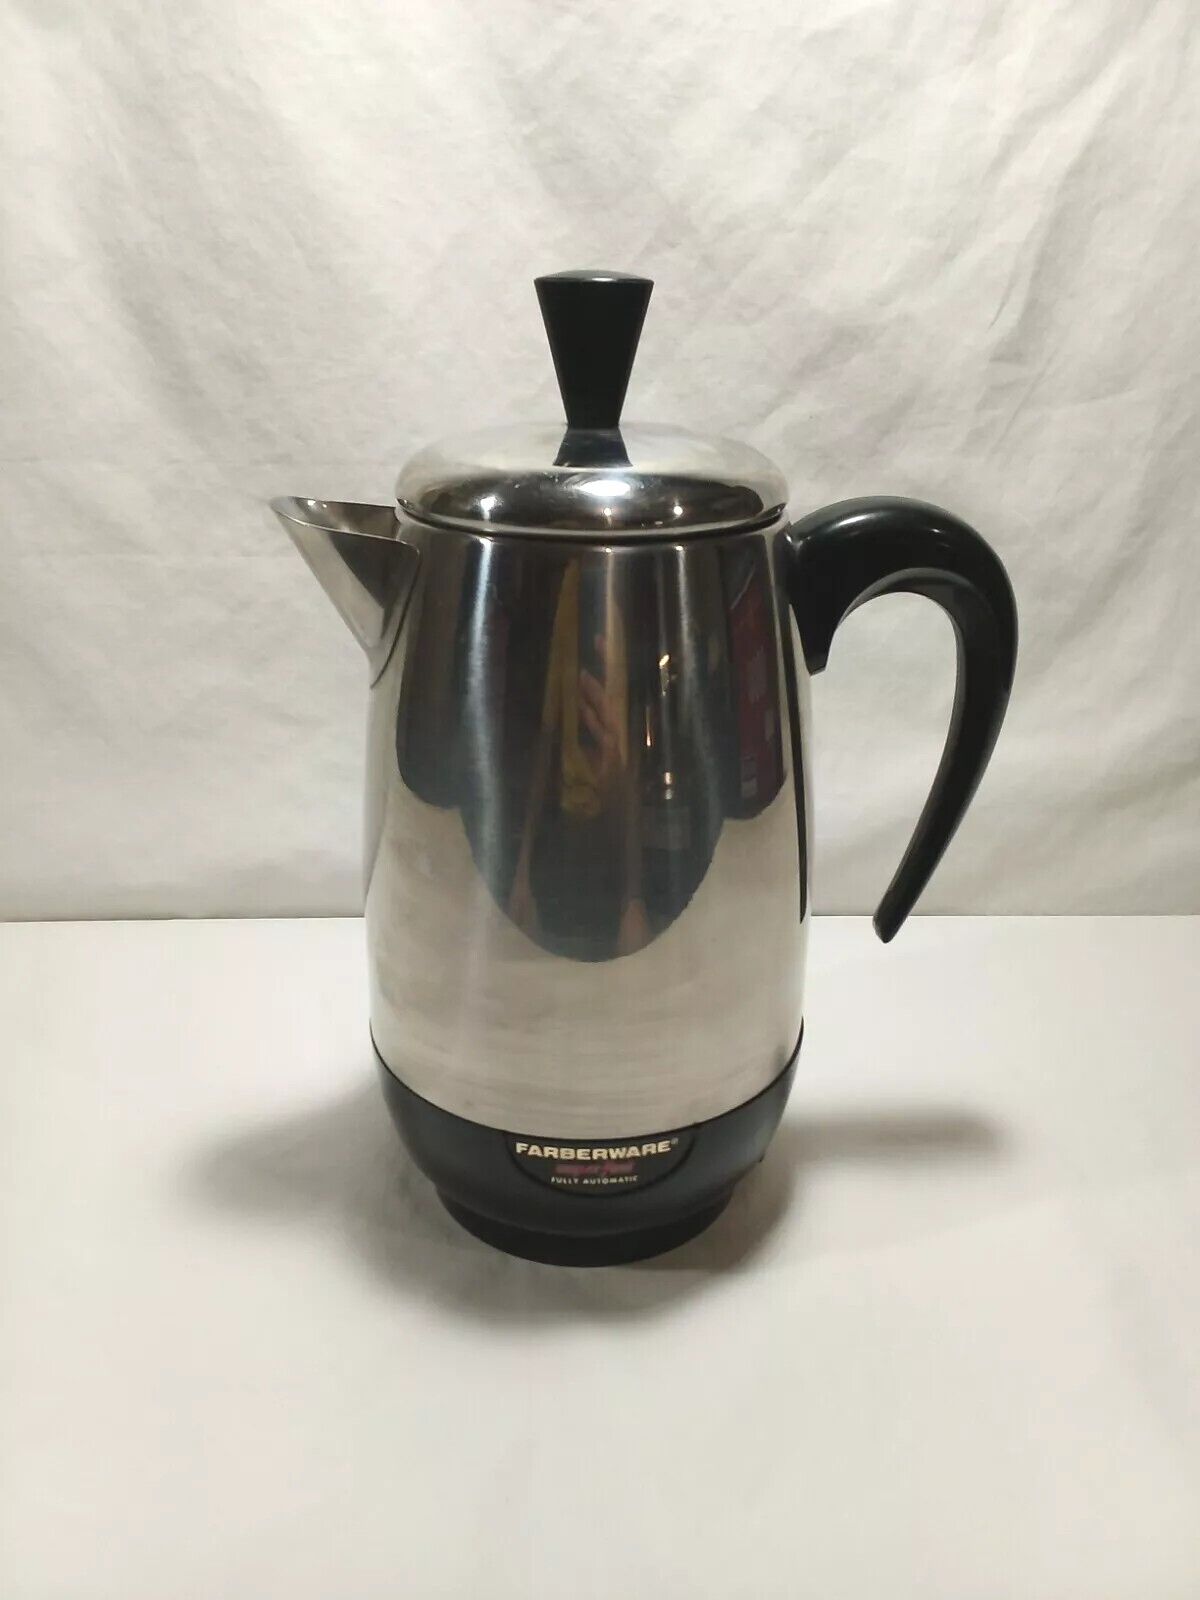 Vintage Farberware Superfast 8 cup Electric Percolator Coffee Maker Tested